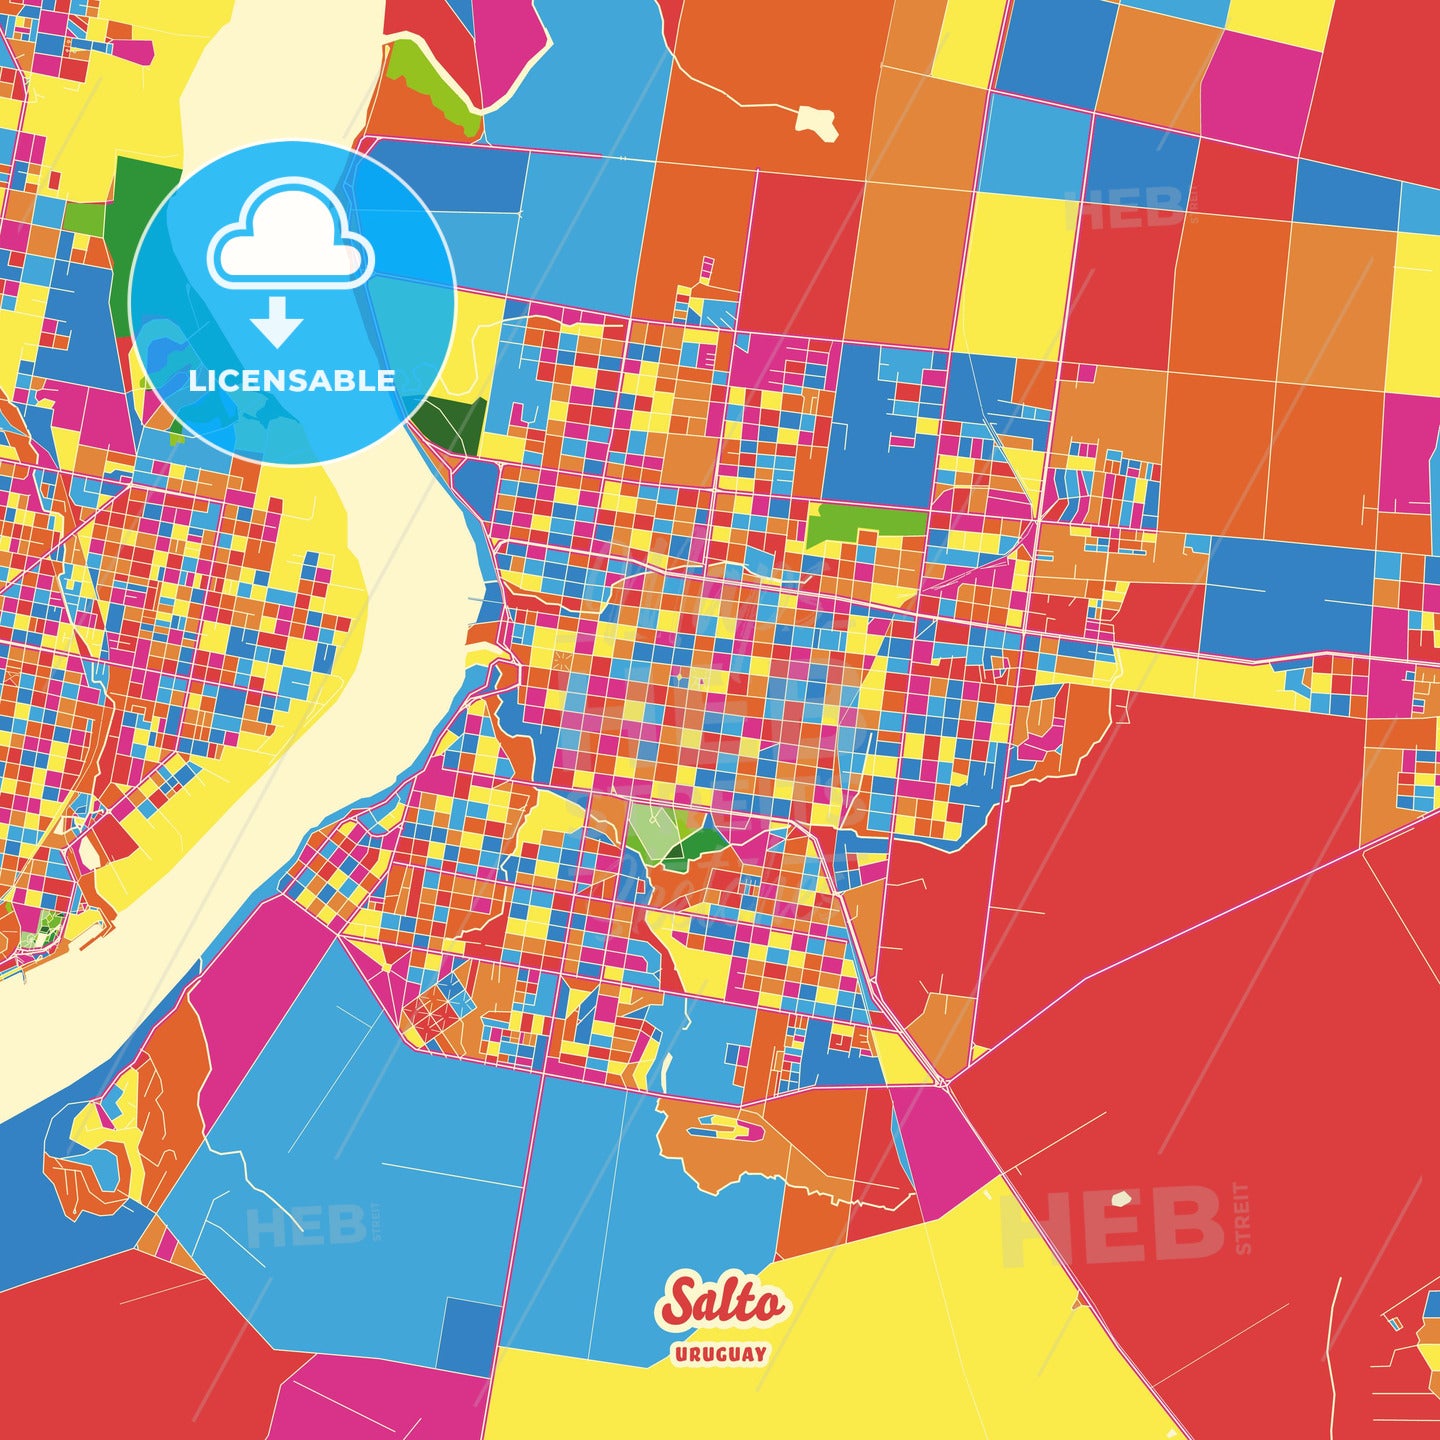 Salto, Uruguay Crazy Colorful Street Map Poster Template - HEBSTREITS Sketches